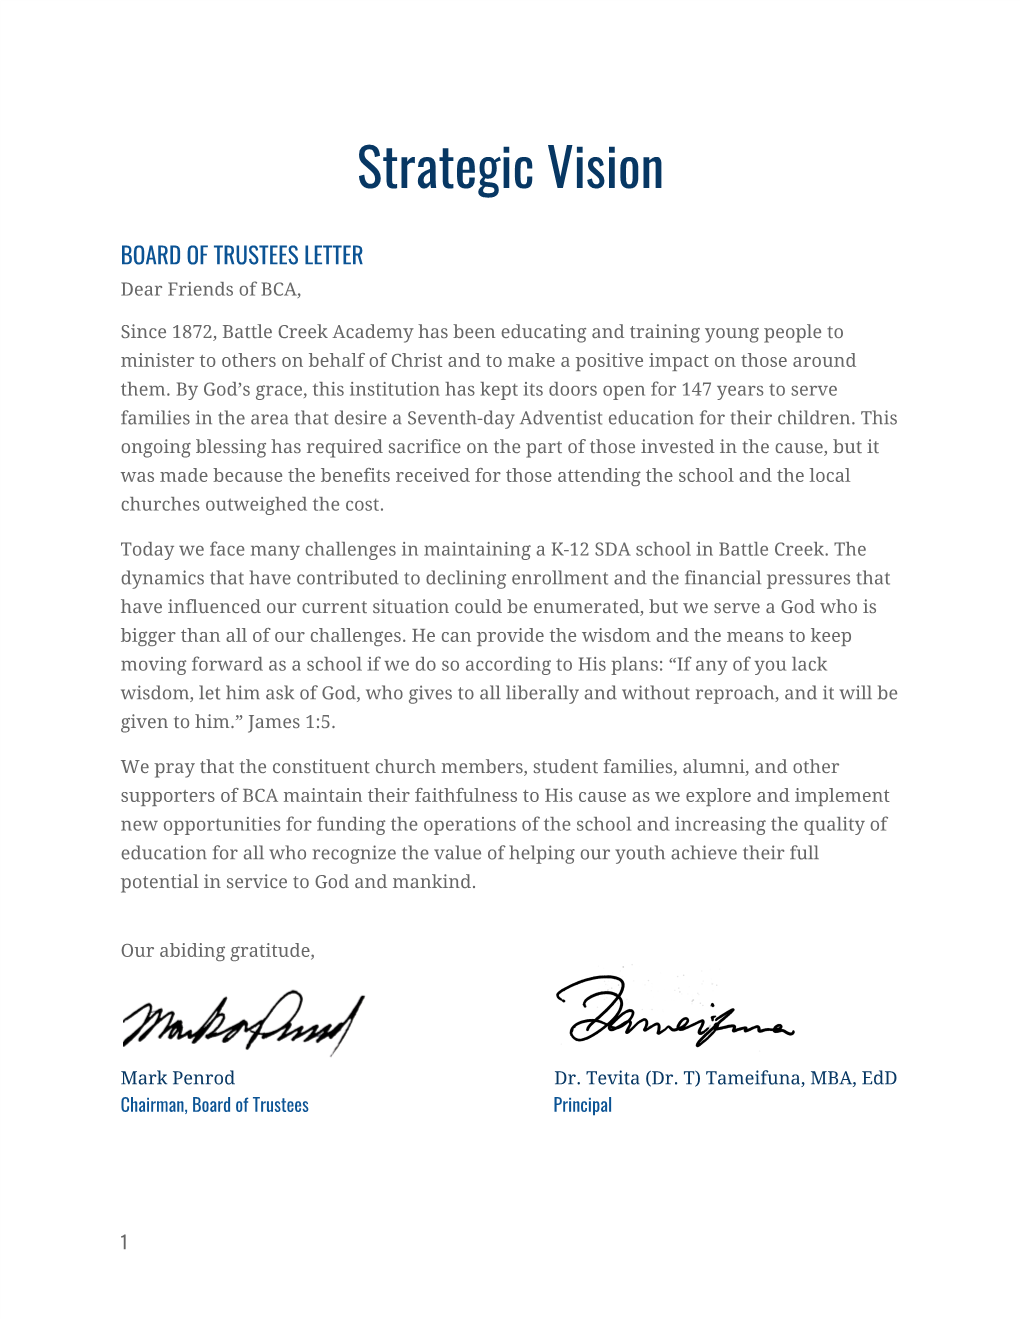 Our Strategic Vision